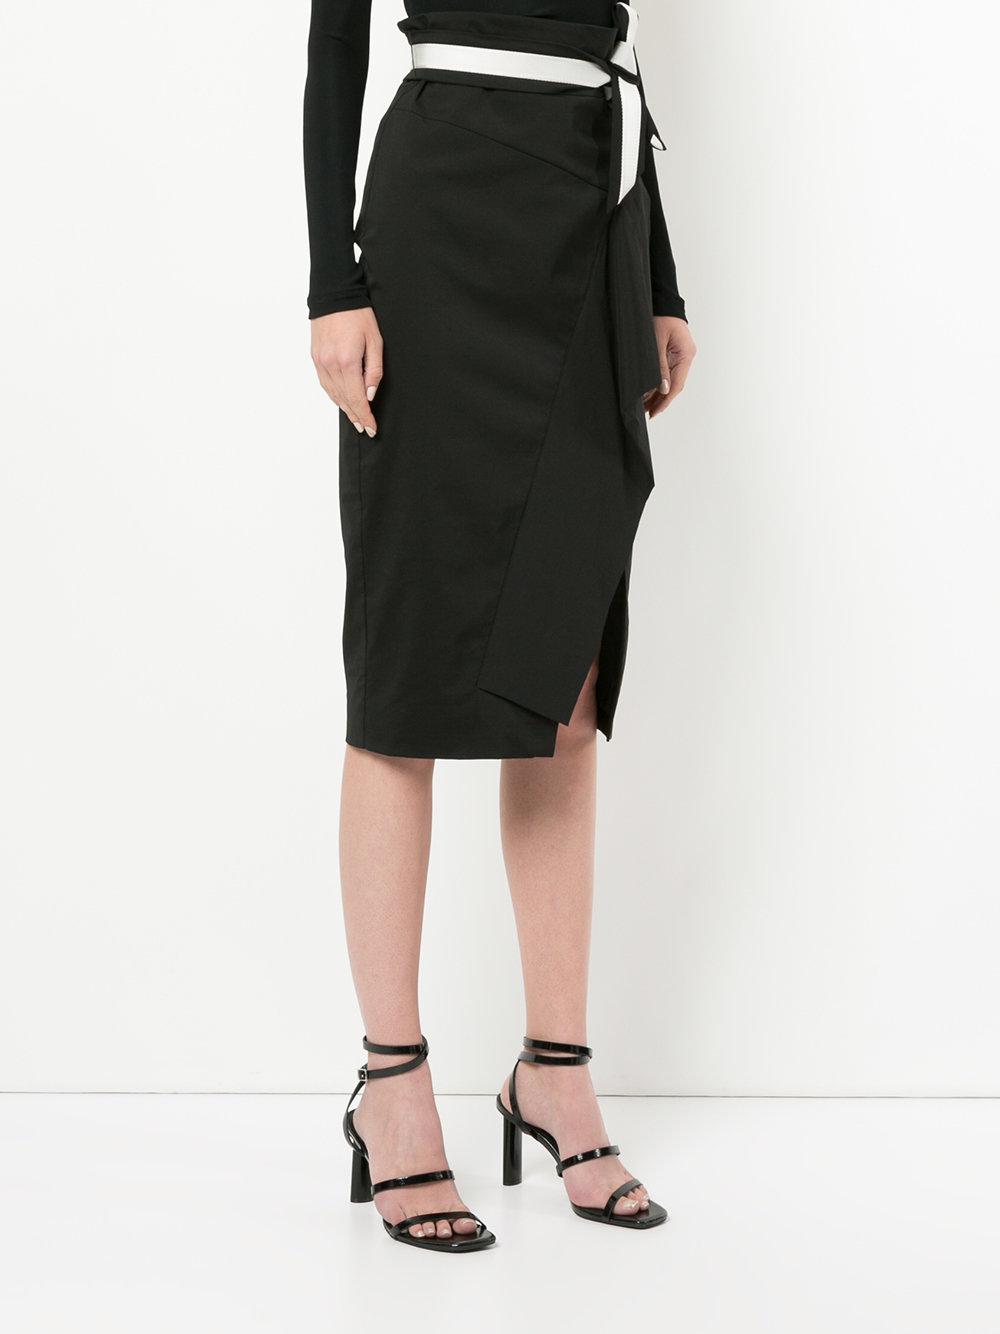 Lyst - Manning Cartell Belted Pencil Skirt in Black